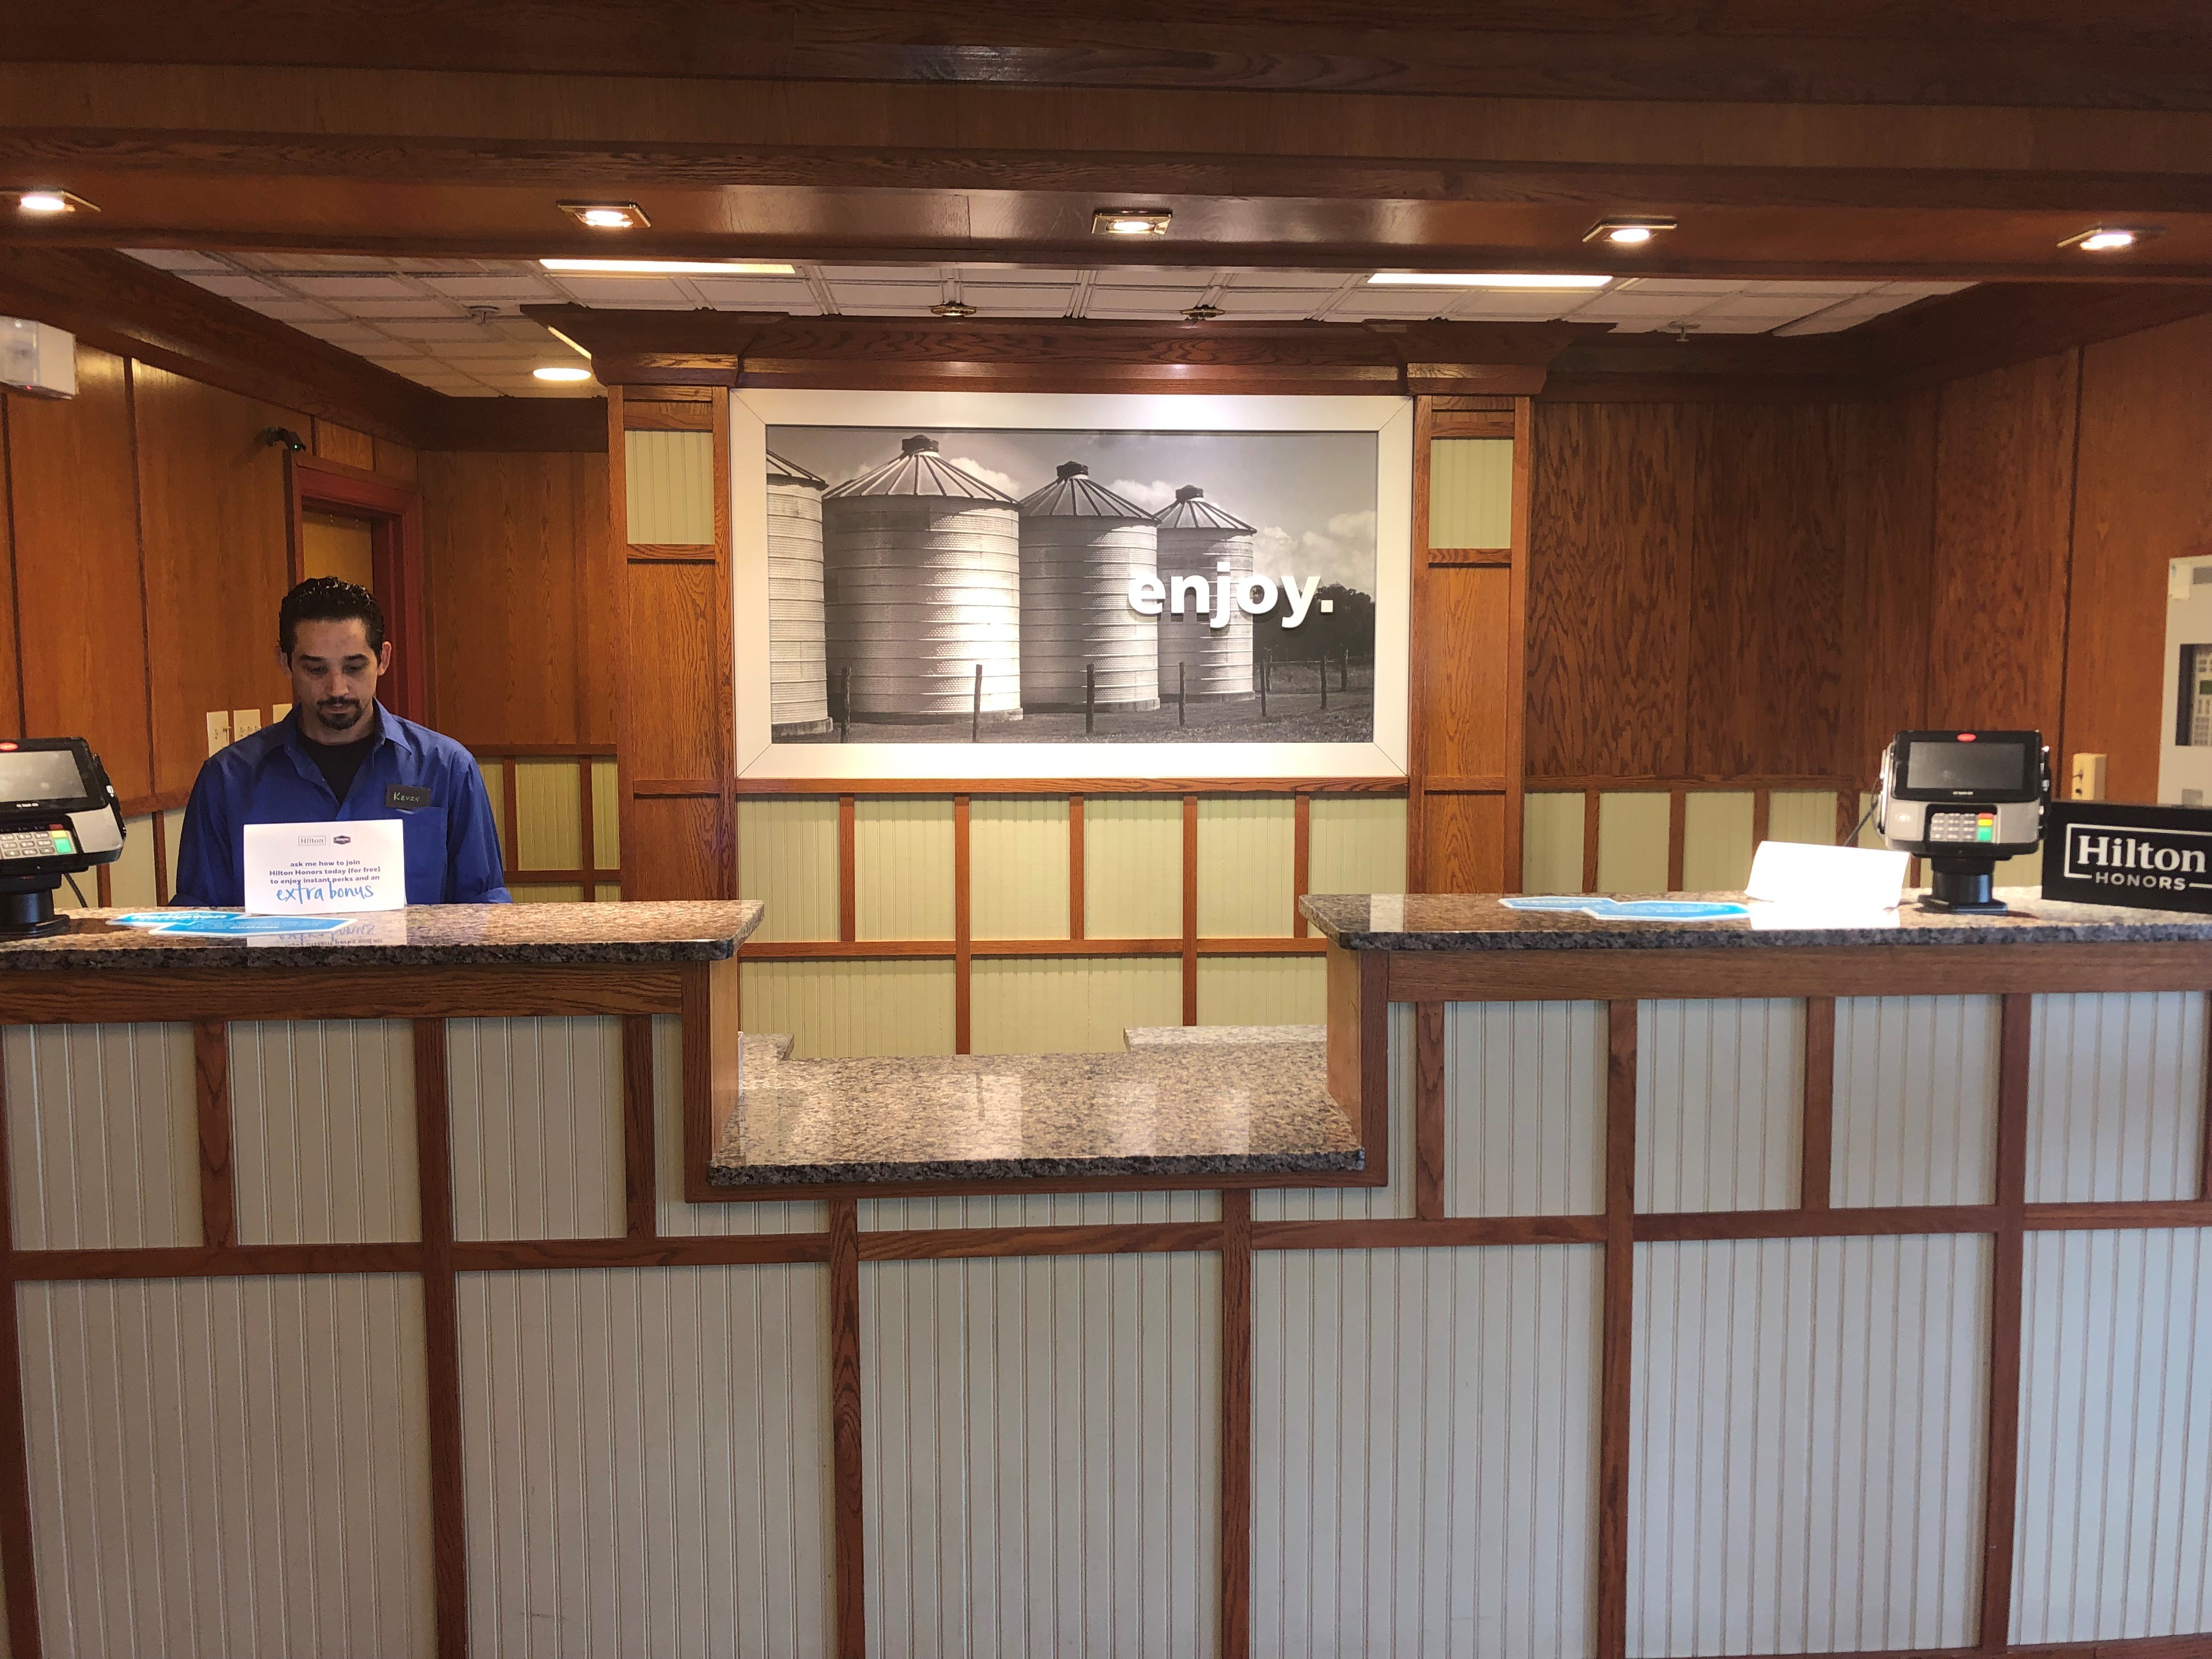 Front Desk Reception Area with Front Desk Staff Member